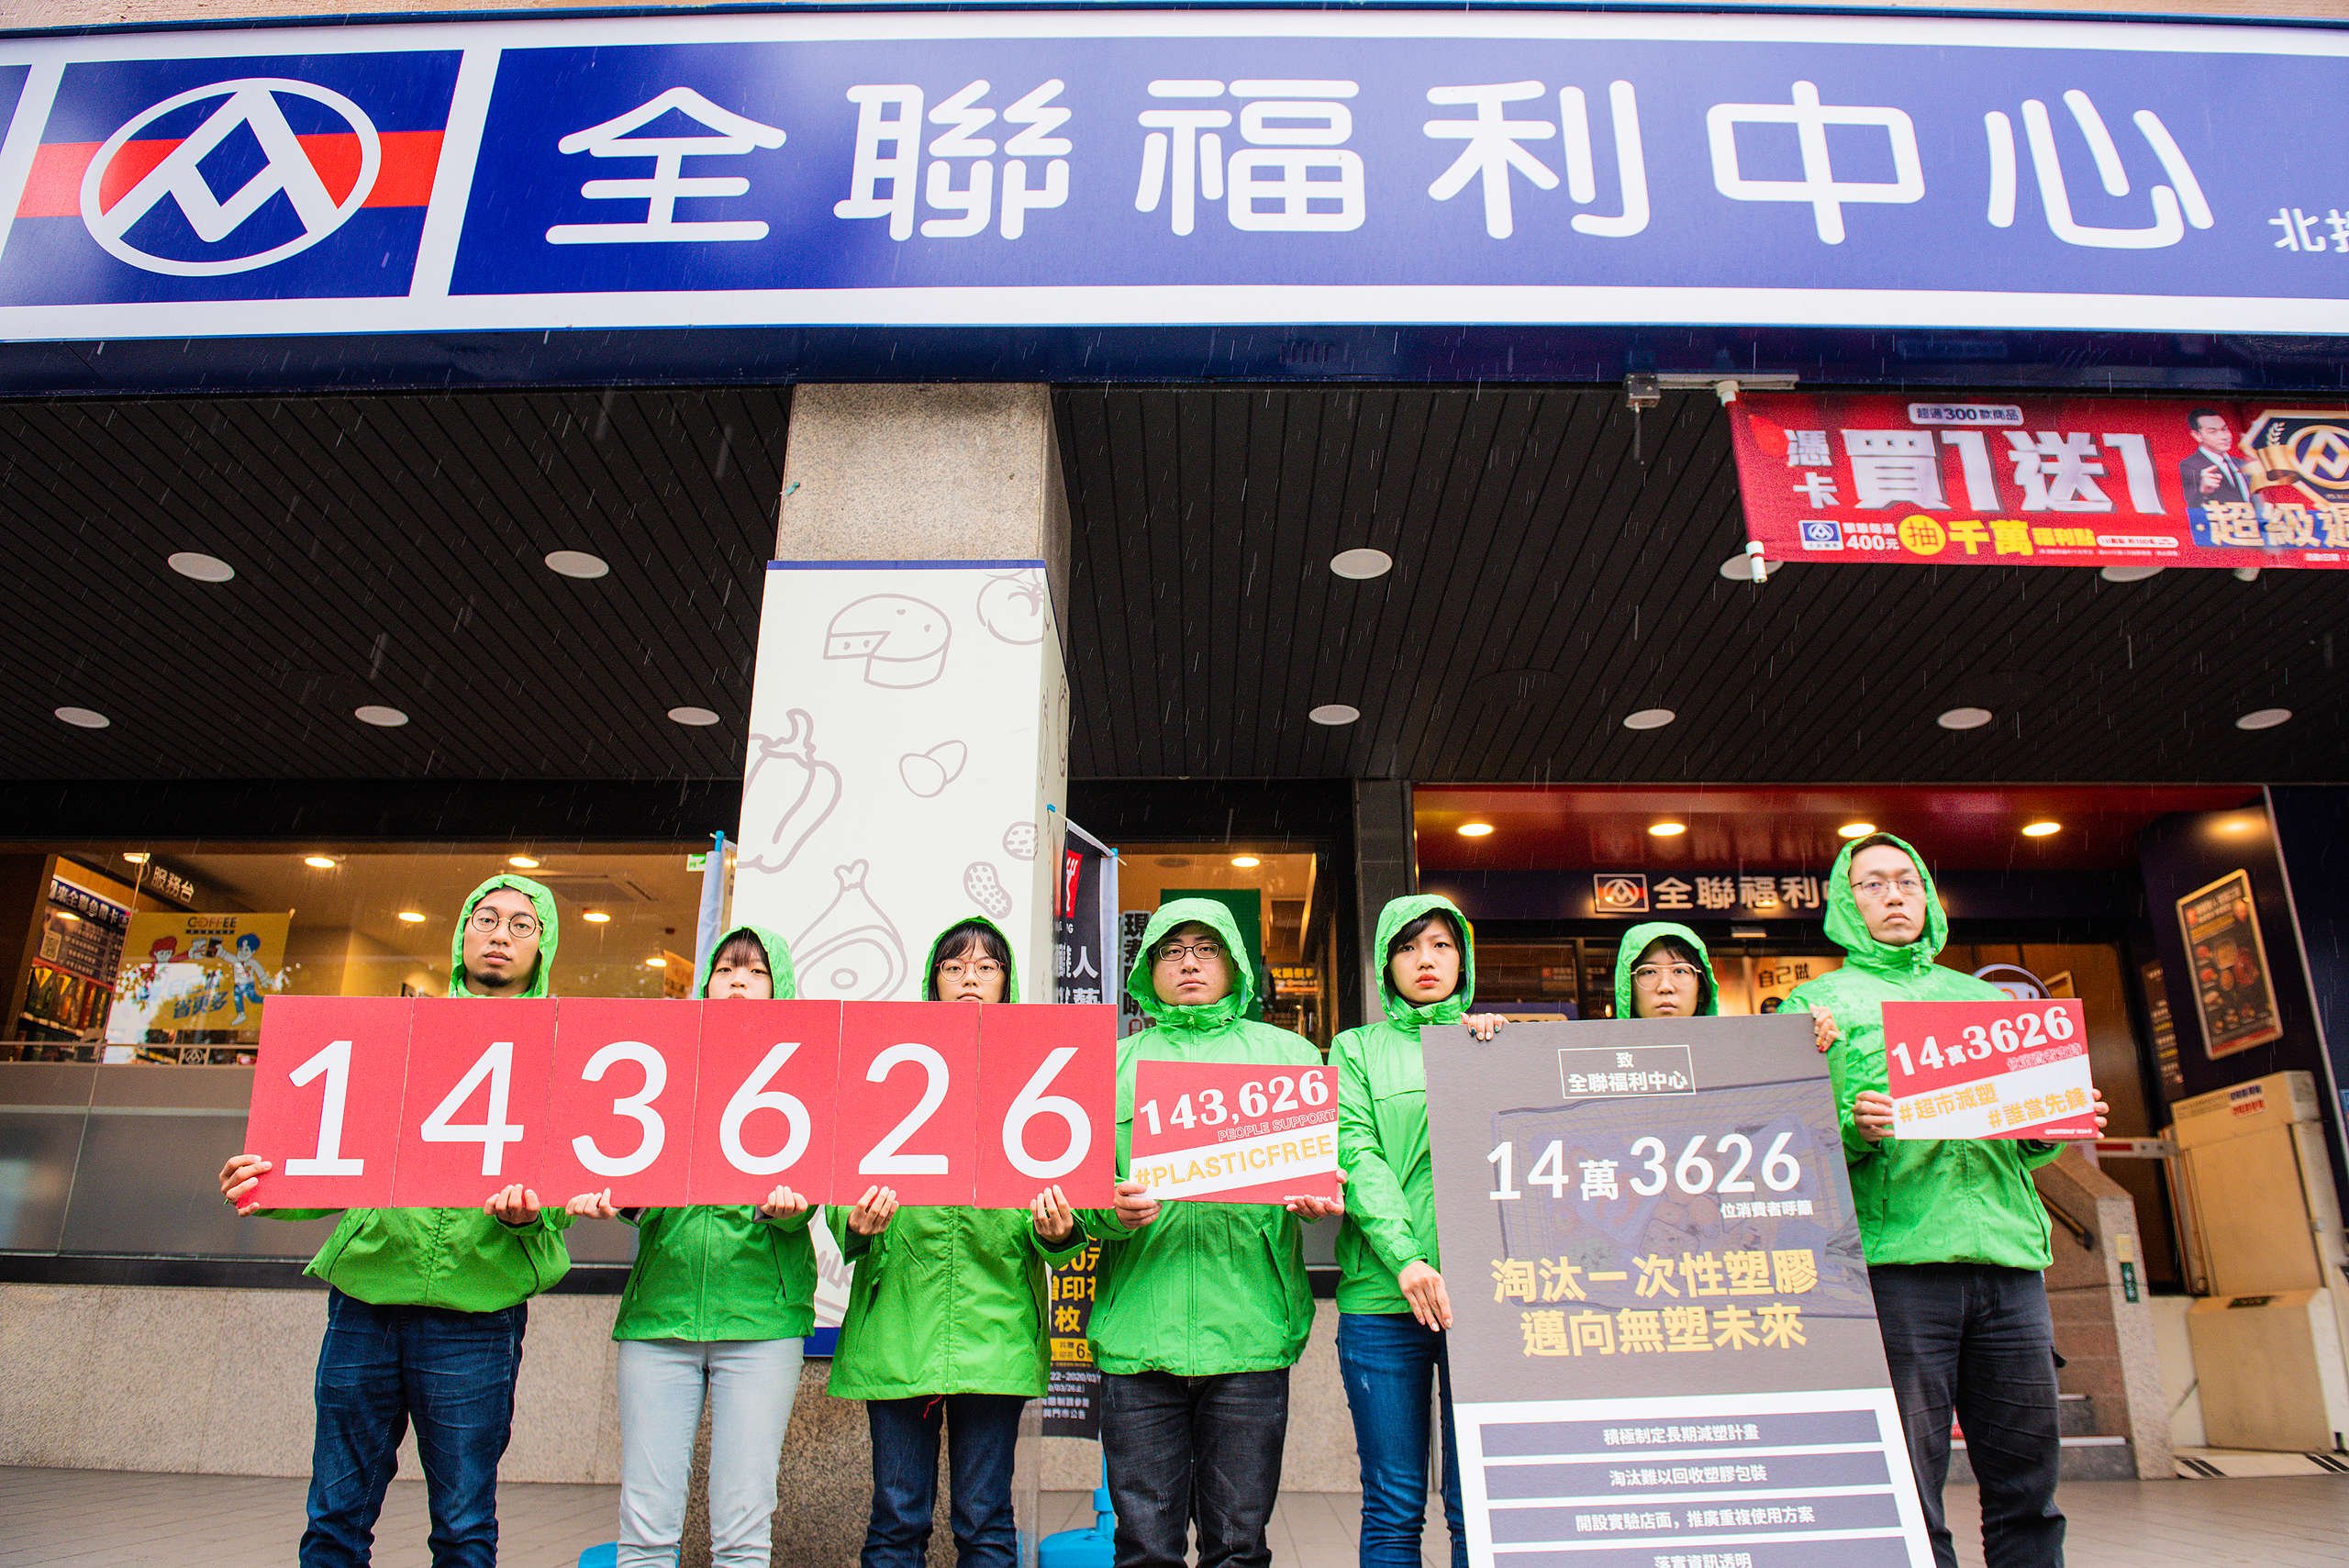 Greenpeace activists holding banners in front of Px-Mart, a supermarket chainstore in Taiwan